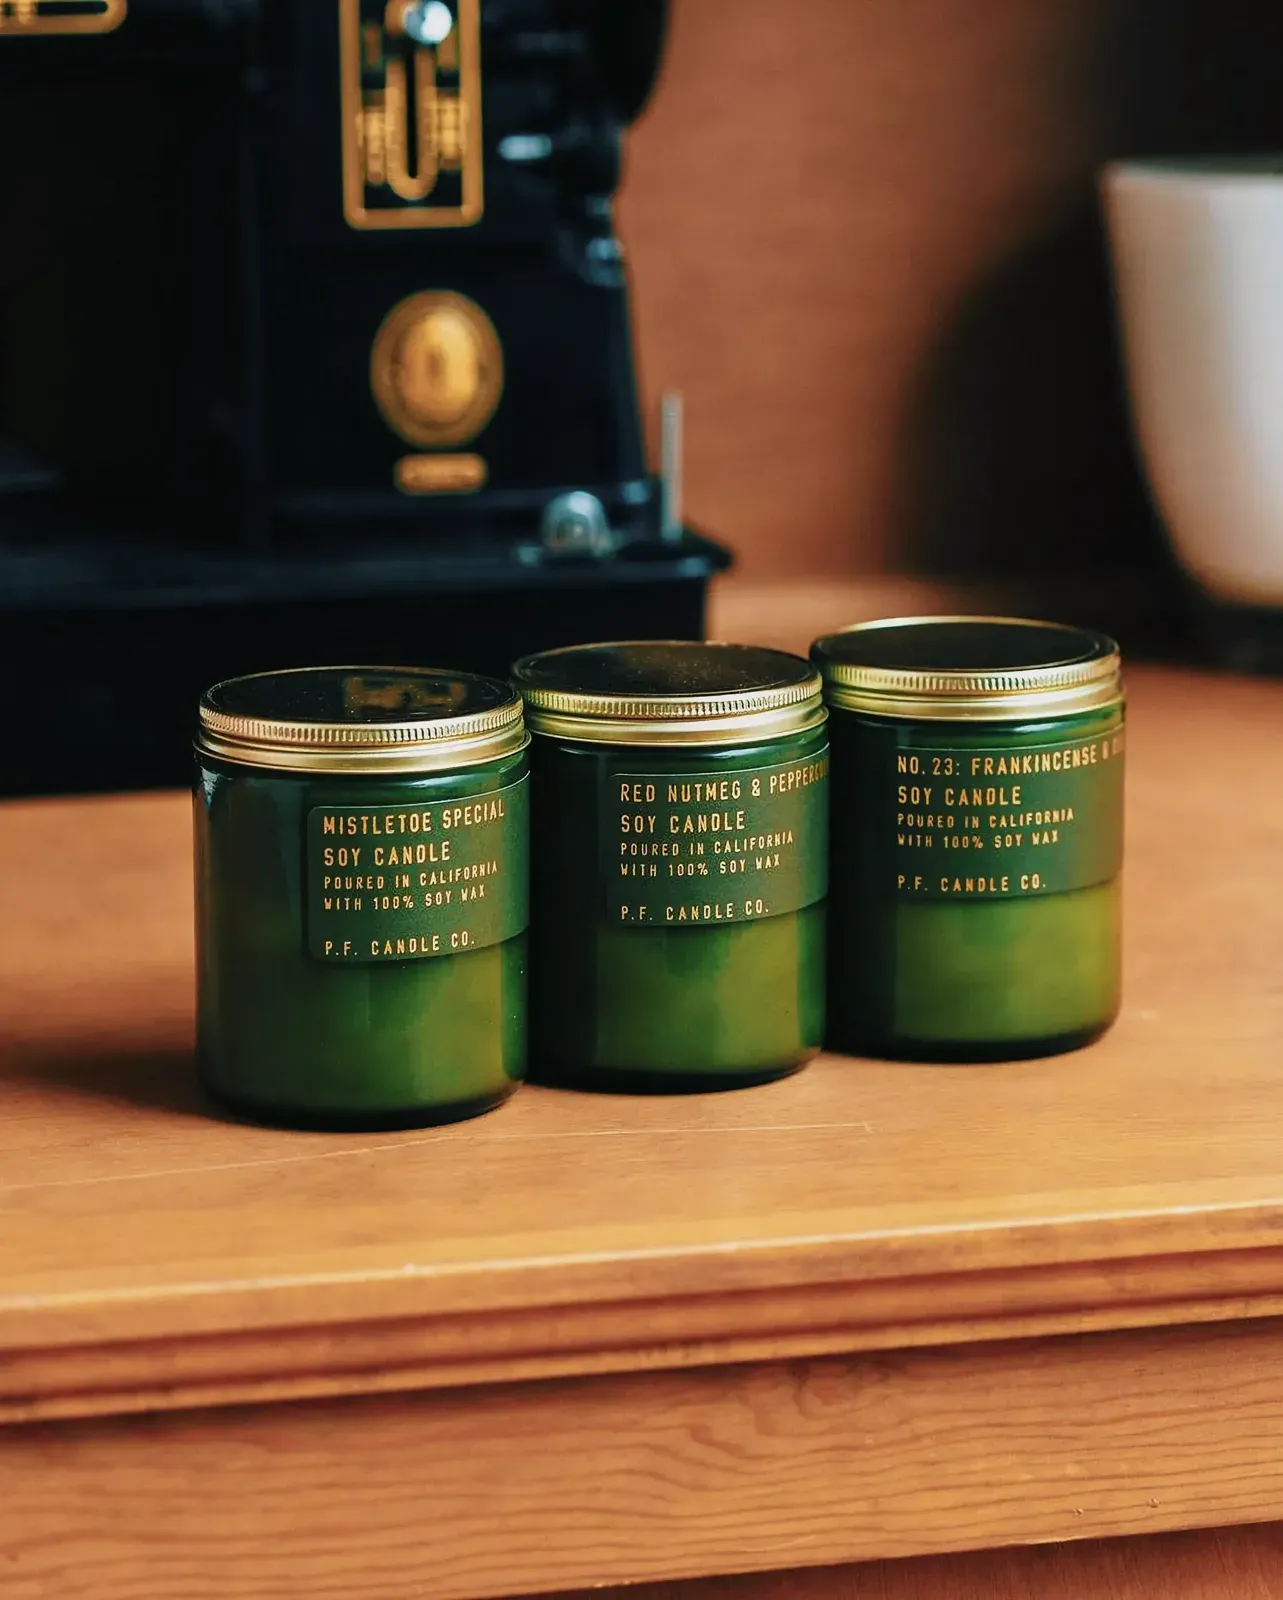 Green glass vessels with gold lids and kraft labels housing winter scented candles